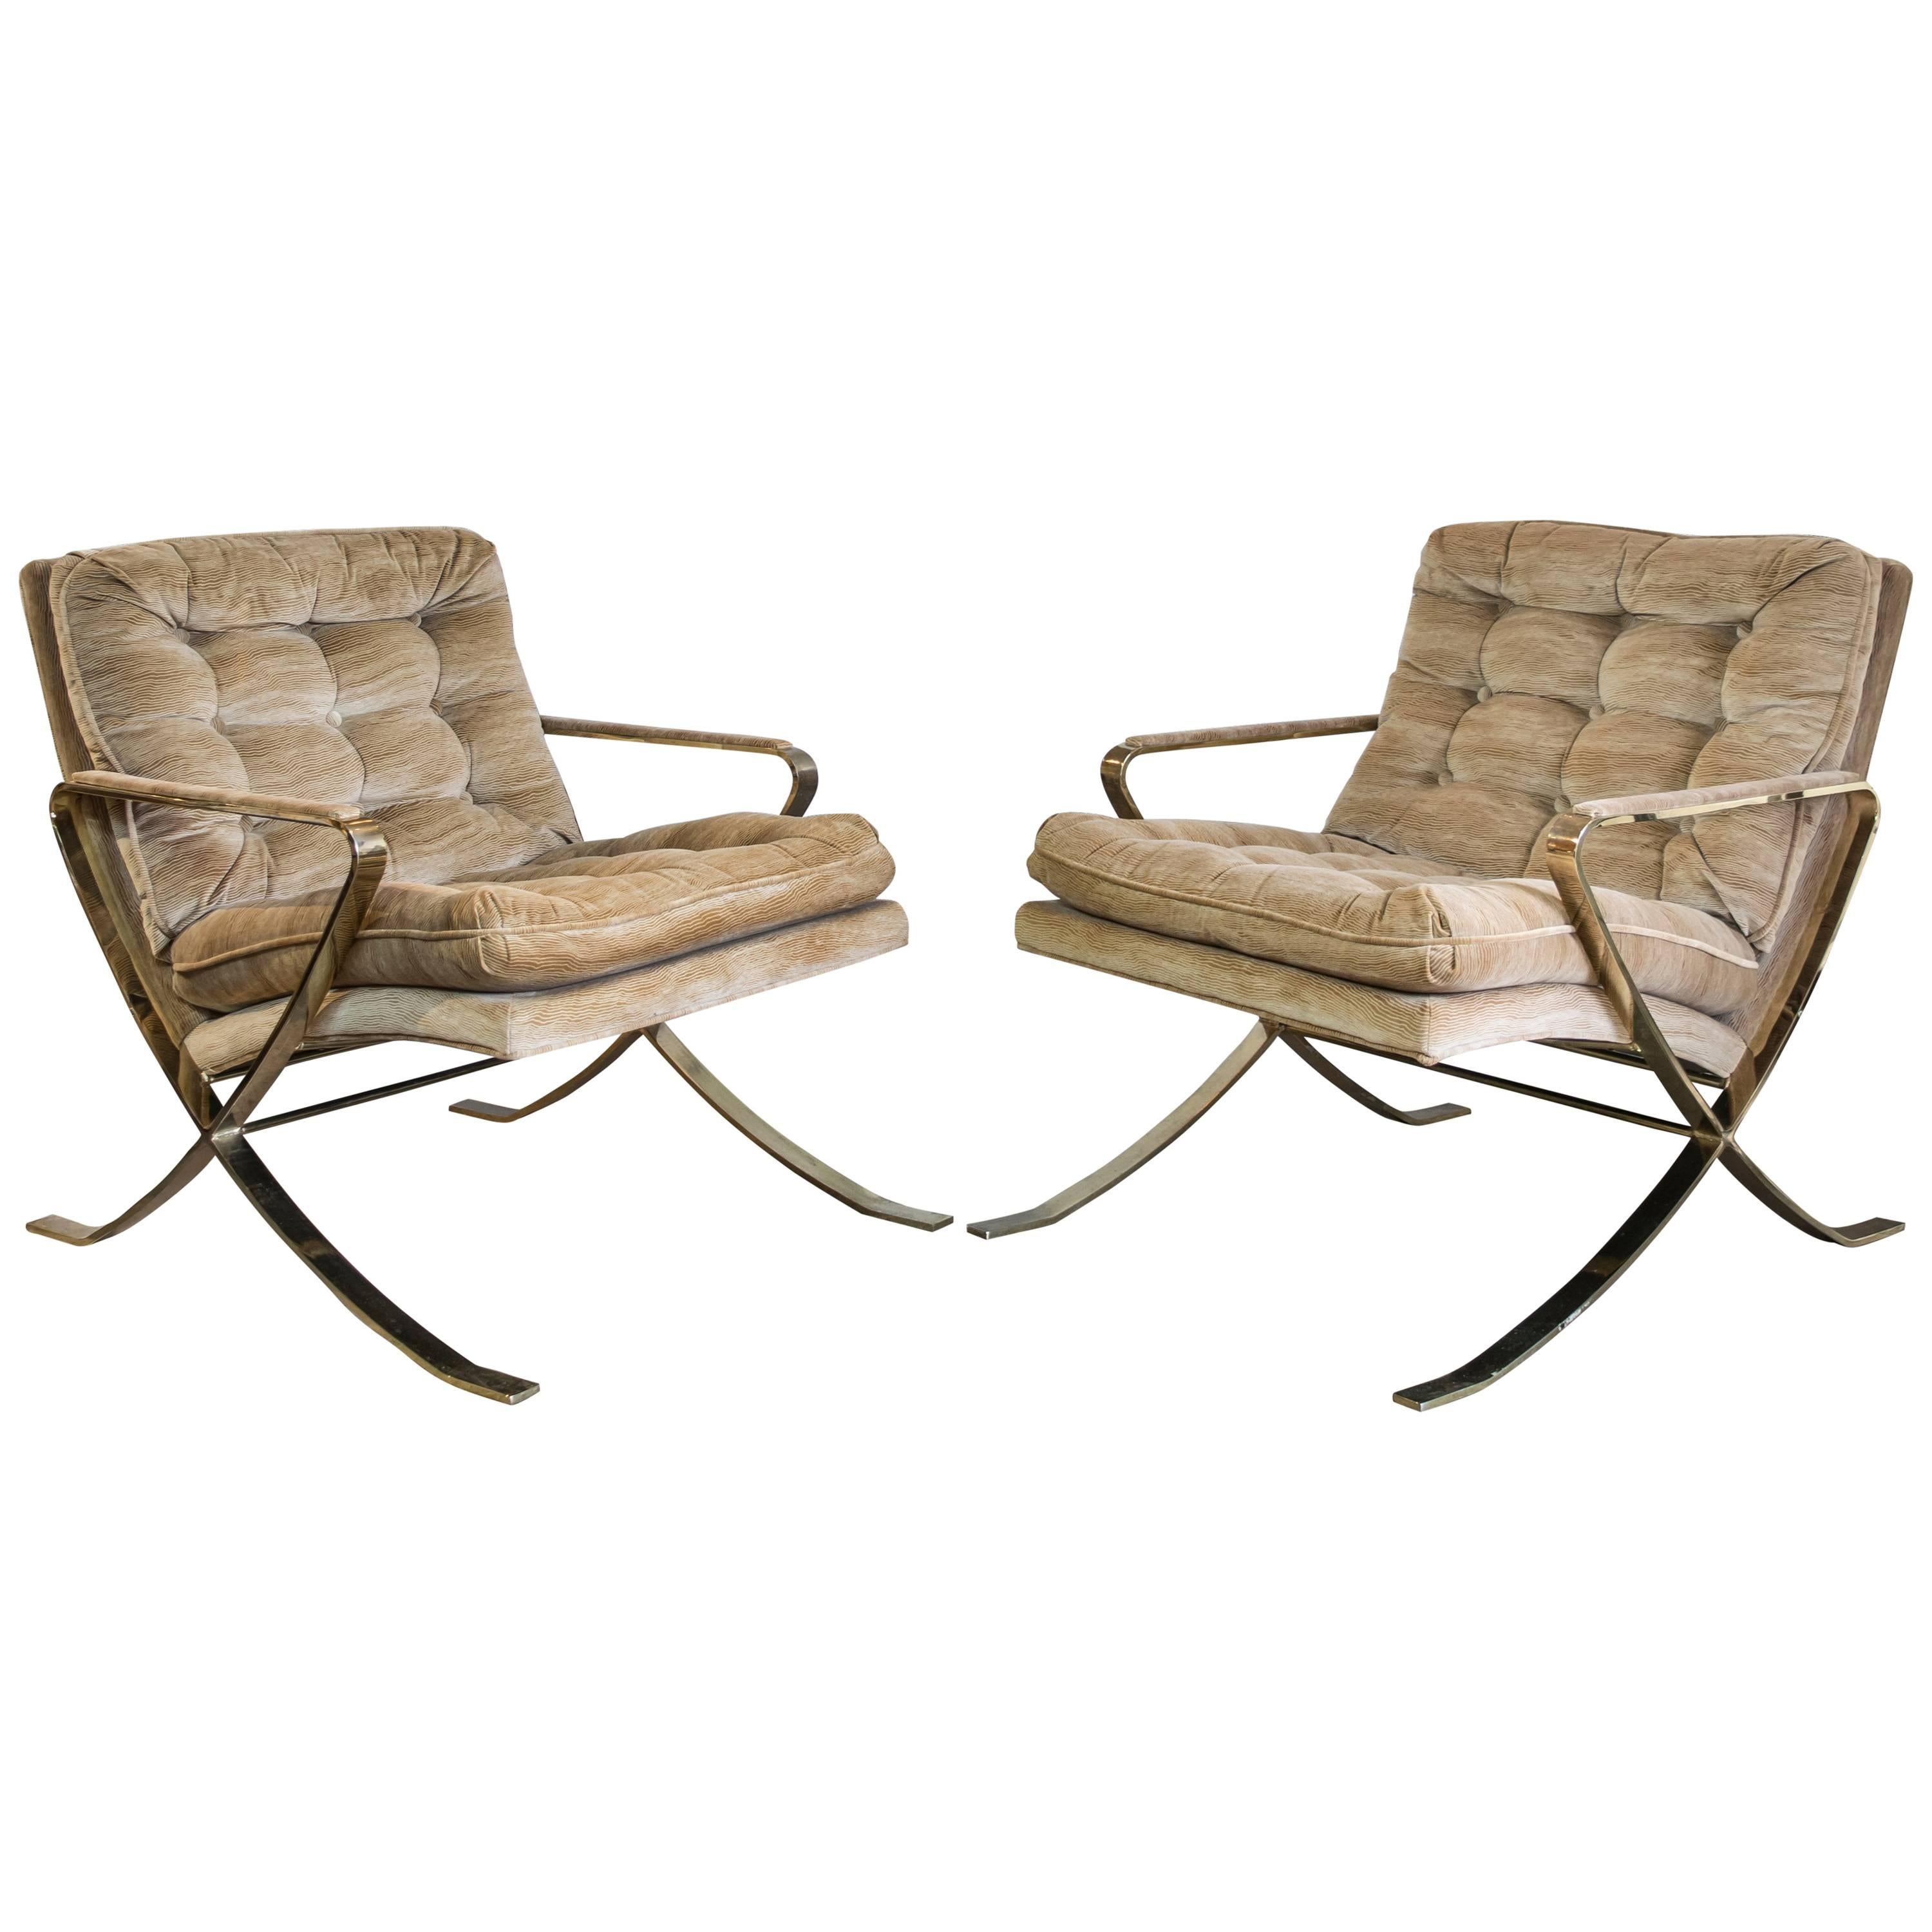 Milo Baughman X-Based Brass Club Chairs with Padded Arm Rests